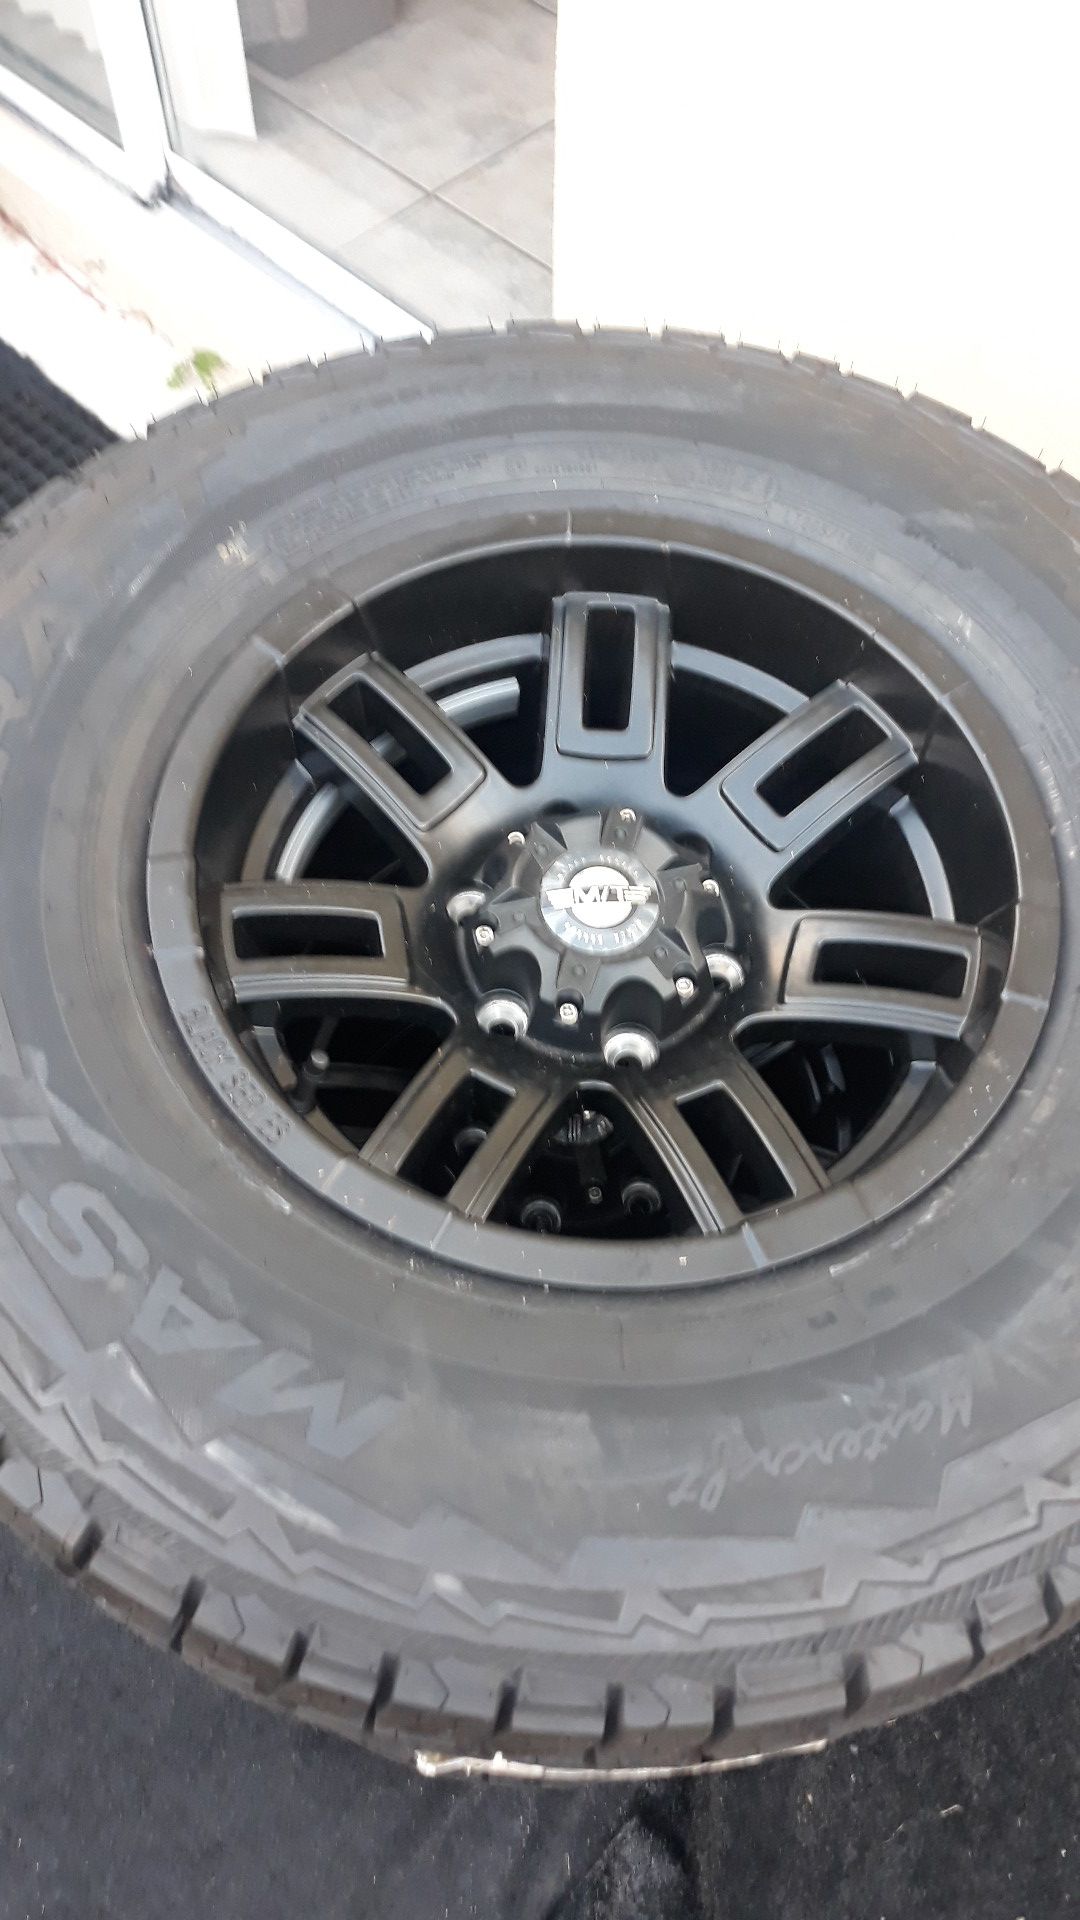 Brand new set of 4 16"x8" Black series rims and mastercraft courser AXT LT265/75/16 tires. 6 lugs